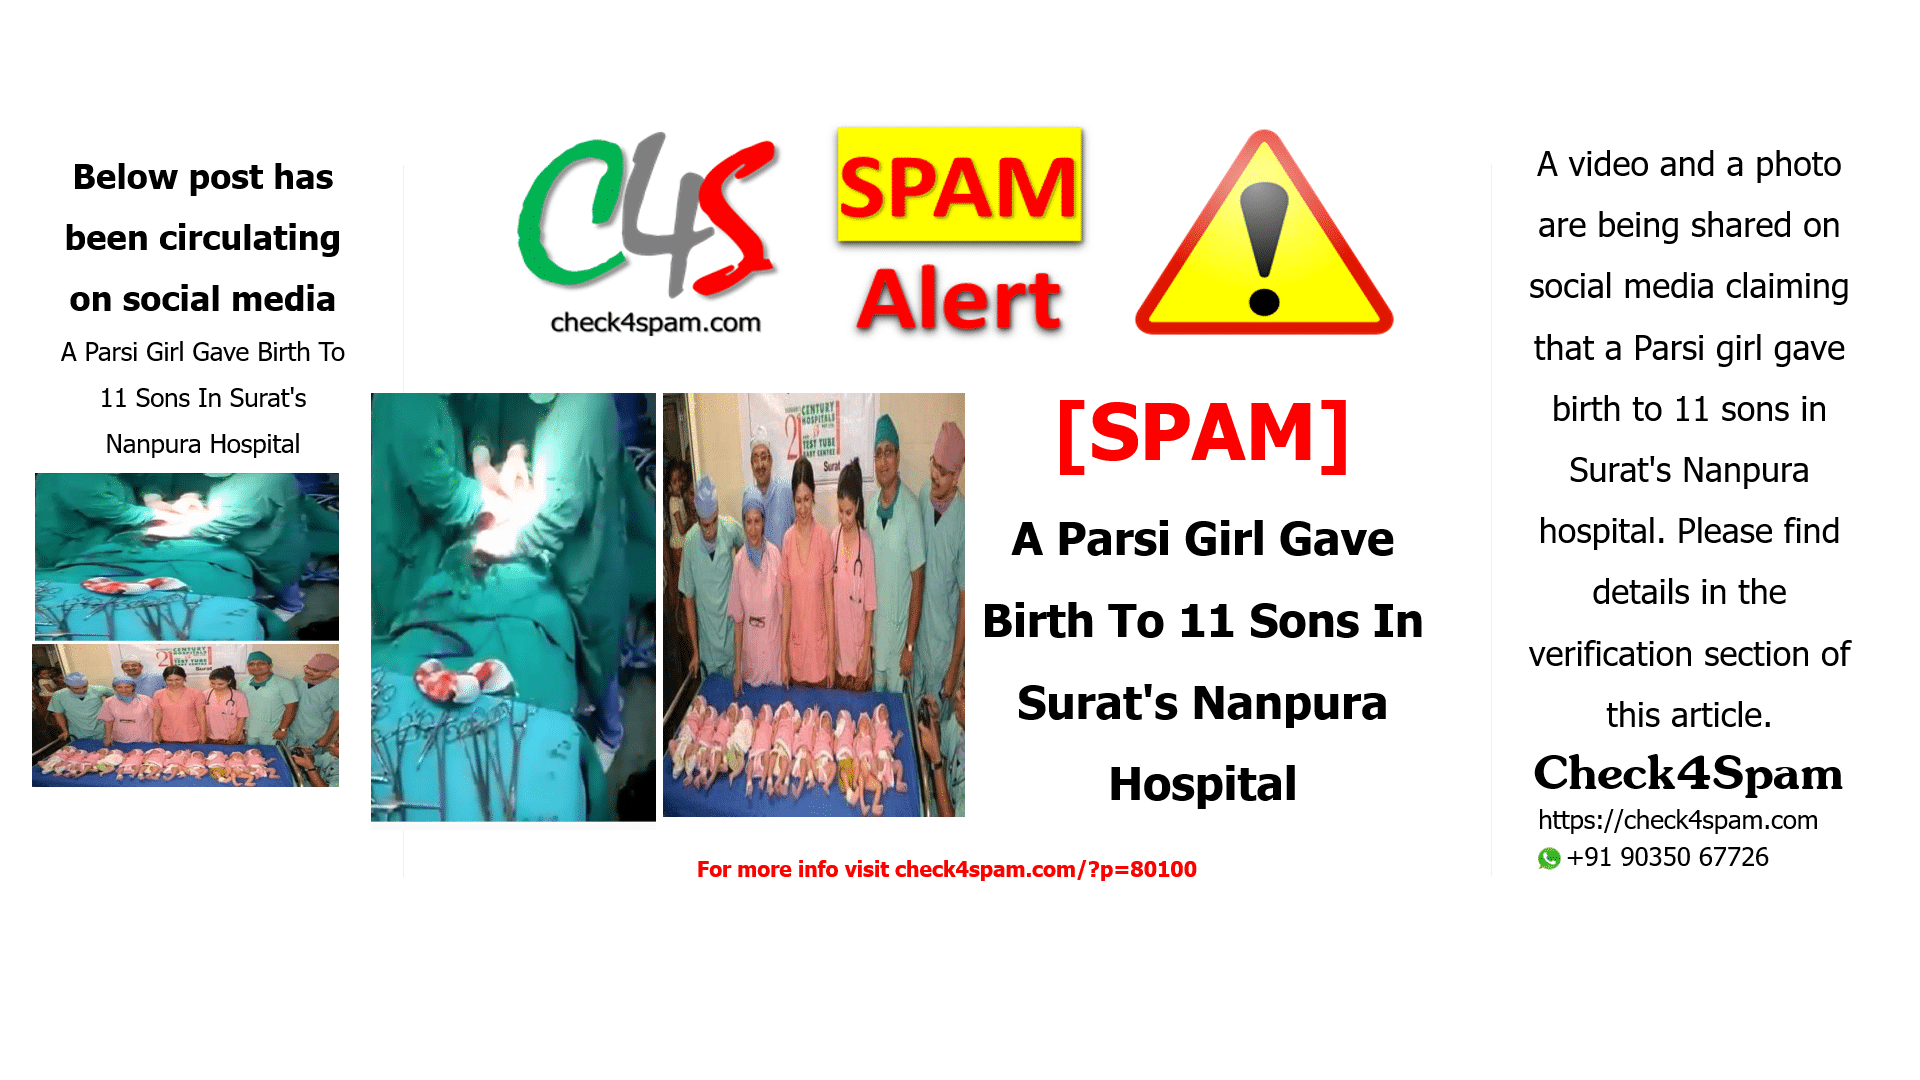 A Parsi Girl Gave Birth To 11 Sons In Surat's Nanpura Hospital